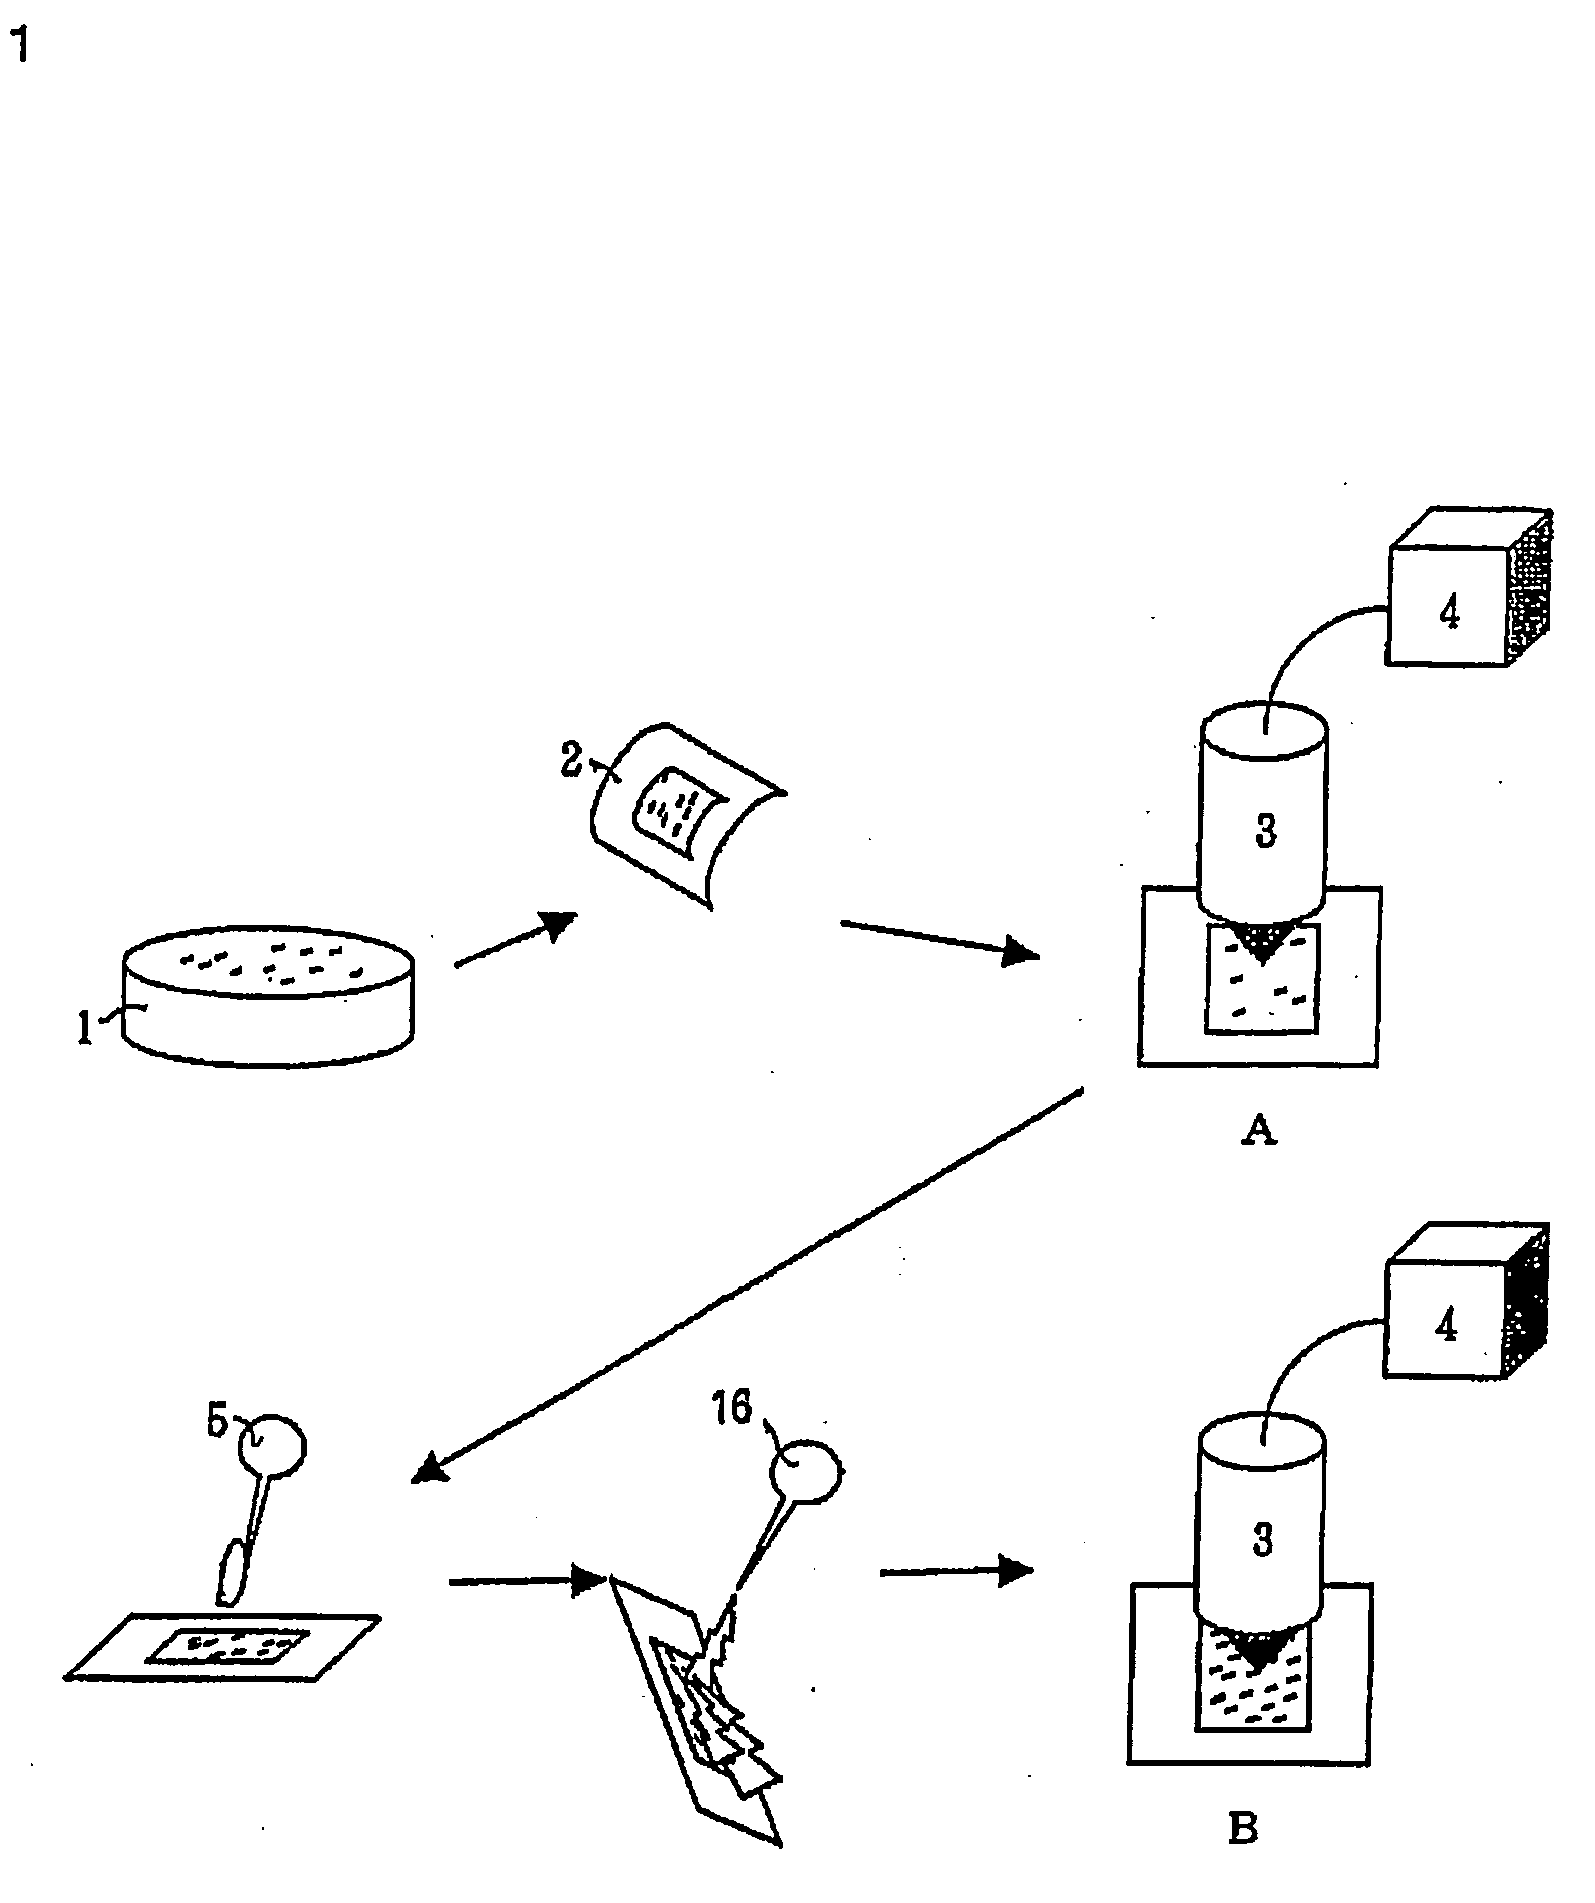 Method of counting microorganisms or cells